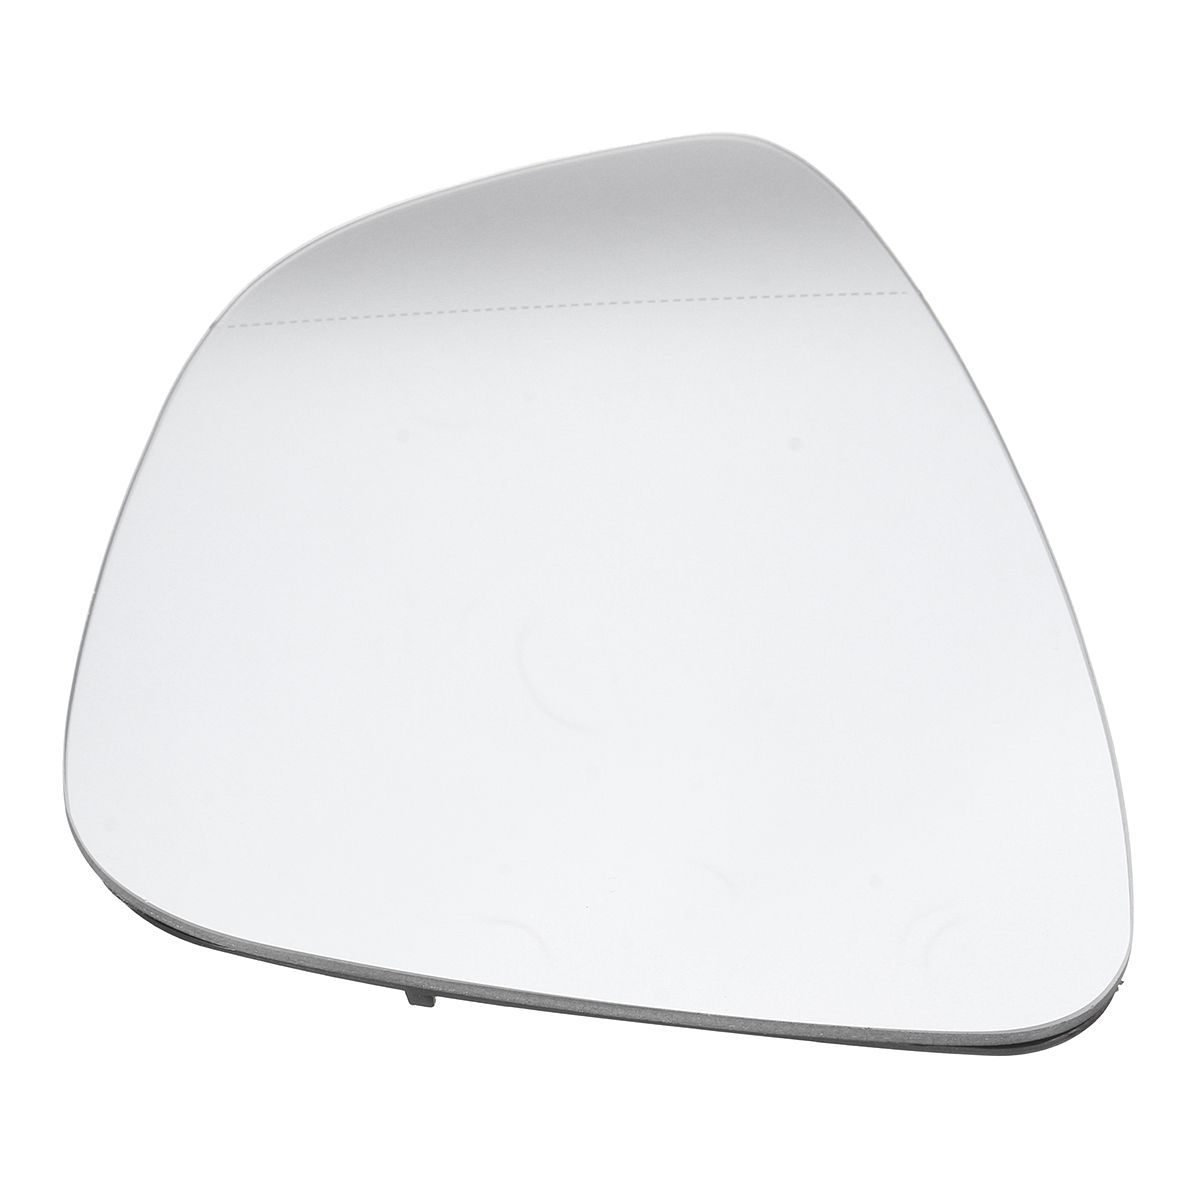 Car-Left-Side-Exterior-Wing-Mirror-Glass-Rear-View-WHeating-For-VW-PASSAT-CC-EOS-1141525